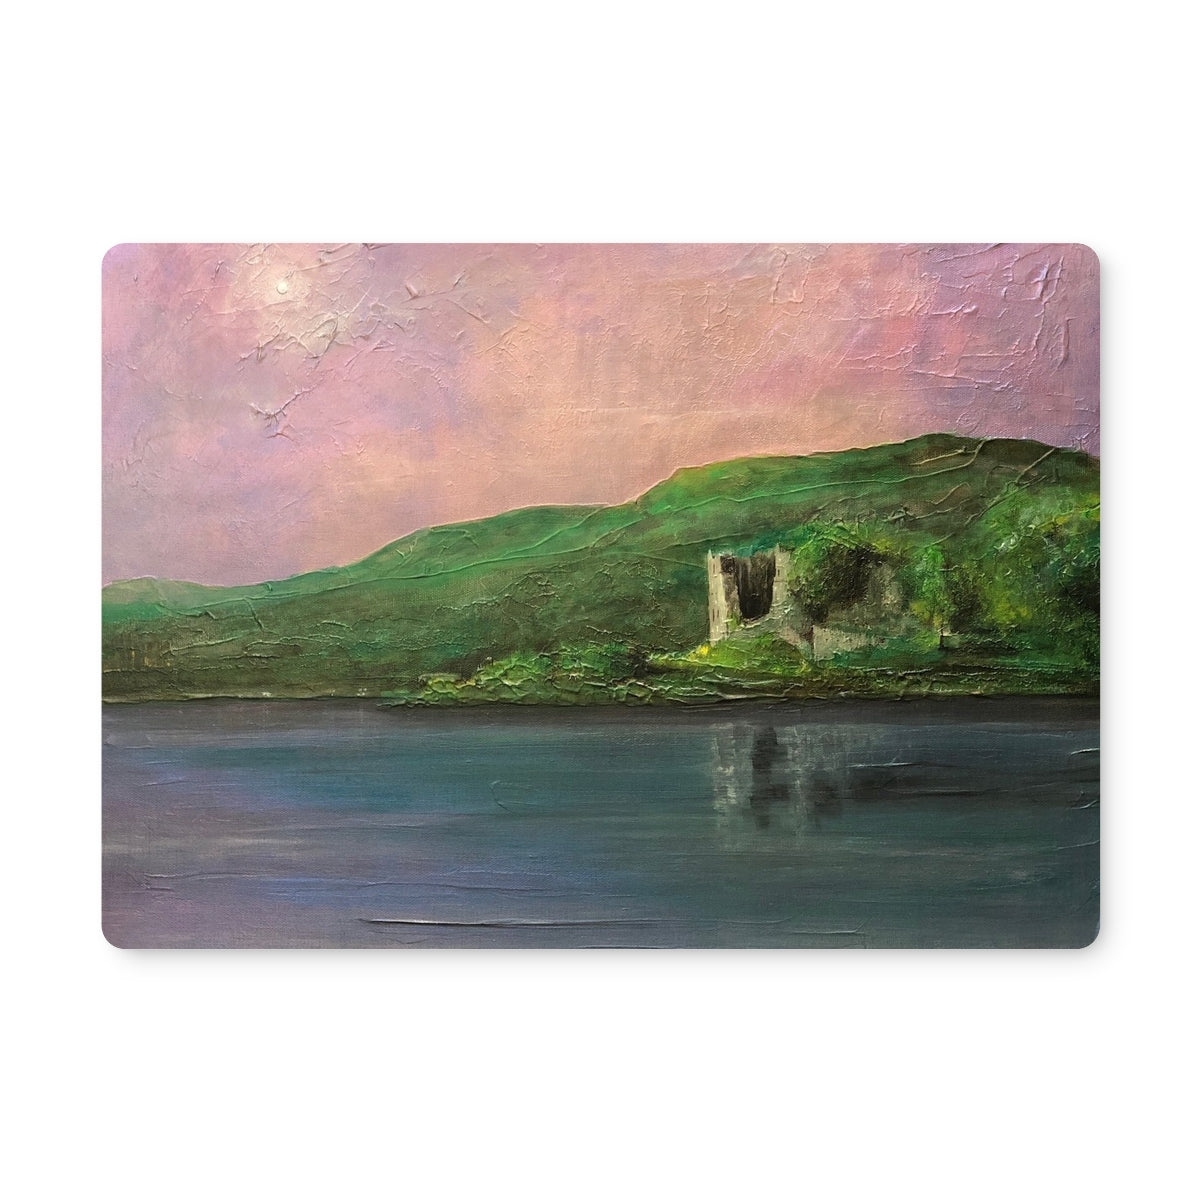 Old Castle Lachlan Art Gifts Placemat-Homeware-Prodigi-2 Placemats-Paintings, Prints, Homeware, Art Gifts From Scotland By Scottish Artist Kevin Hunter